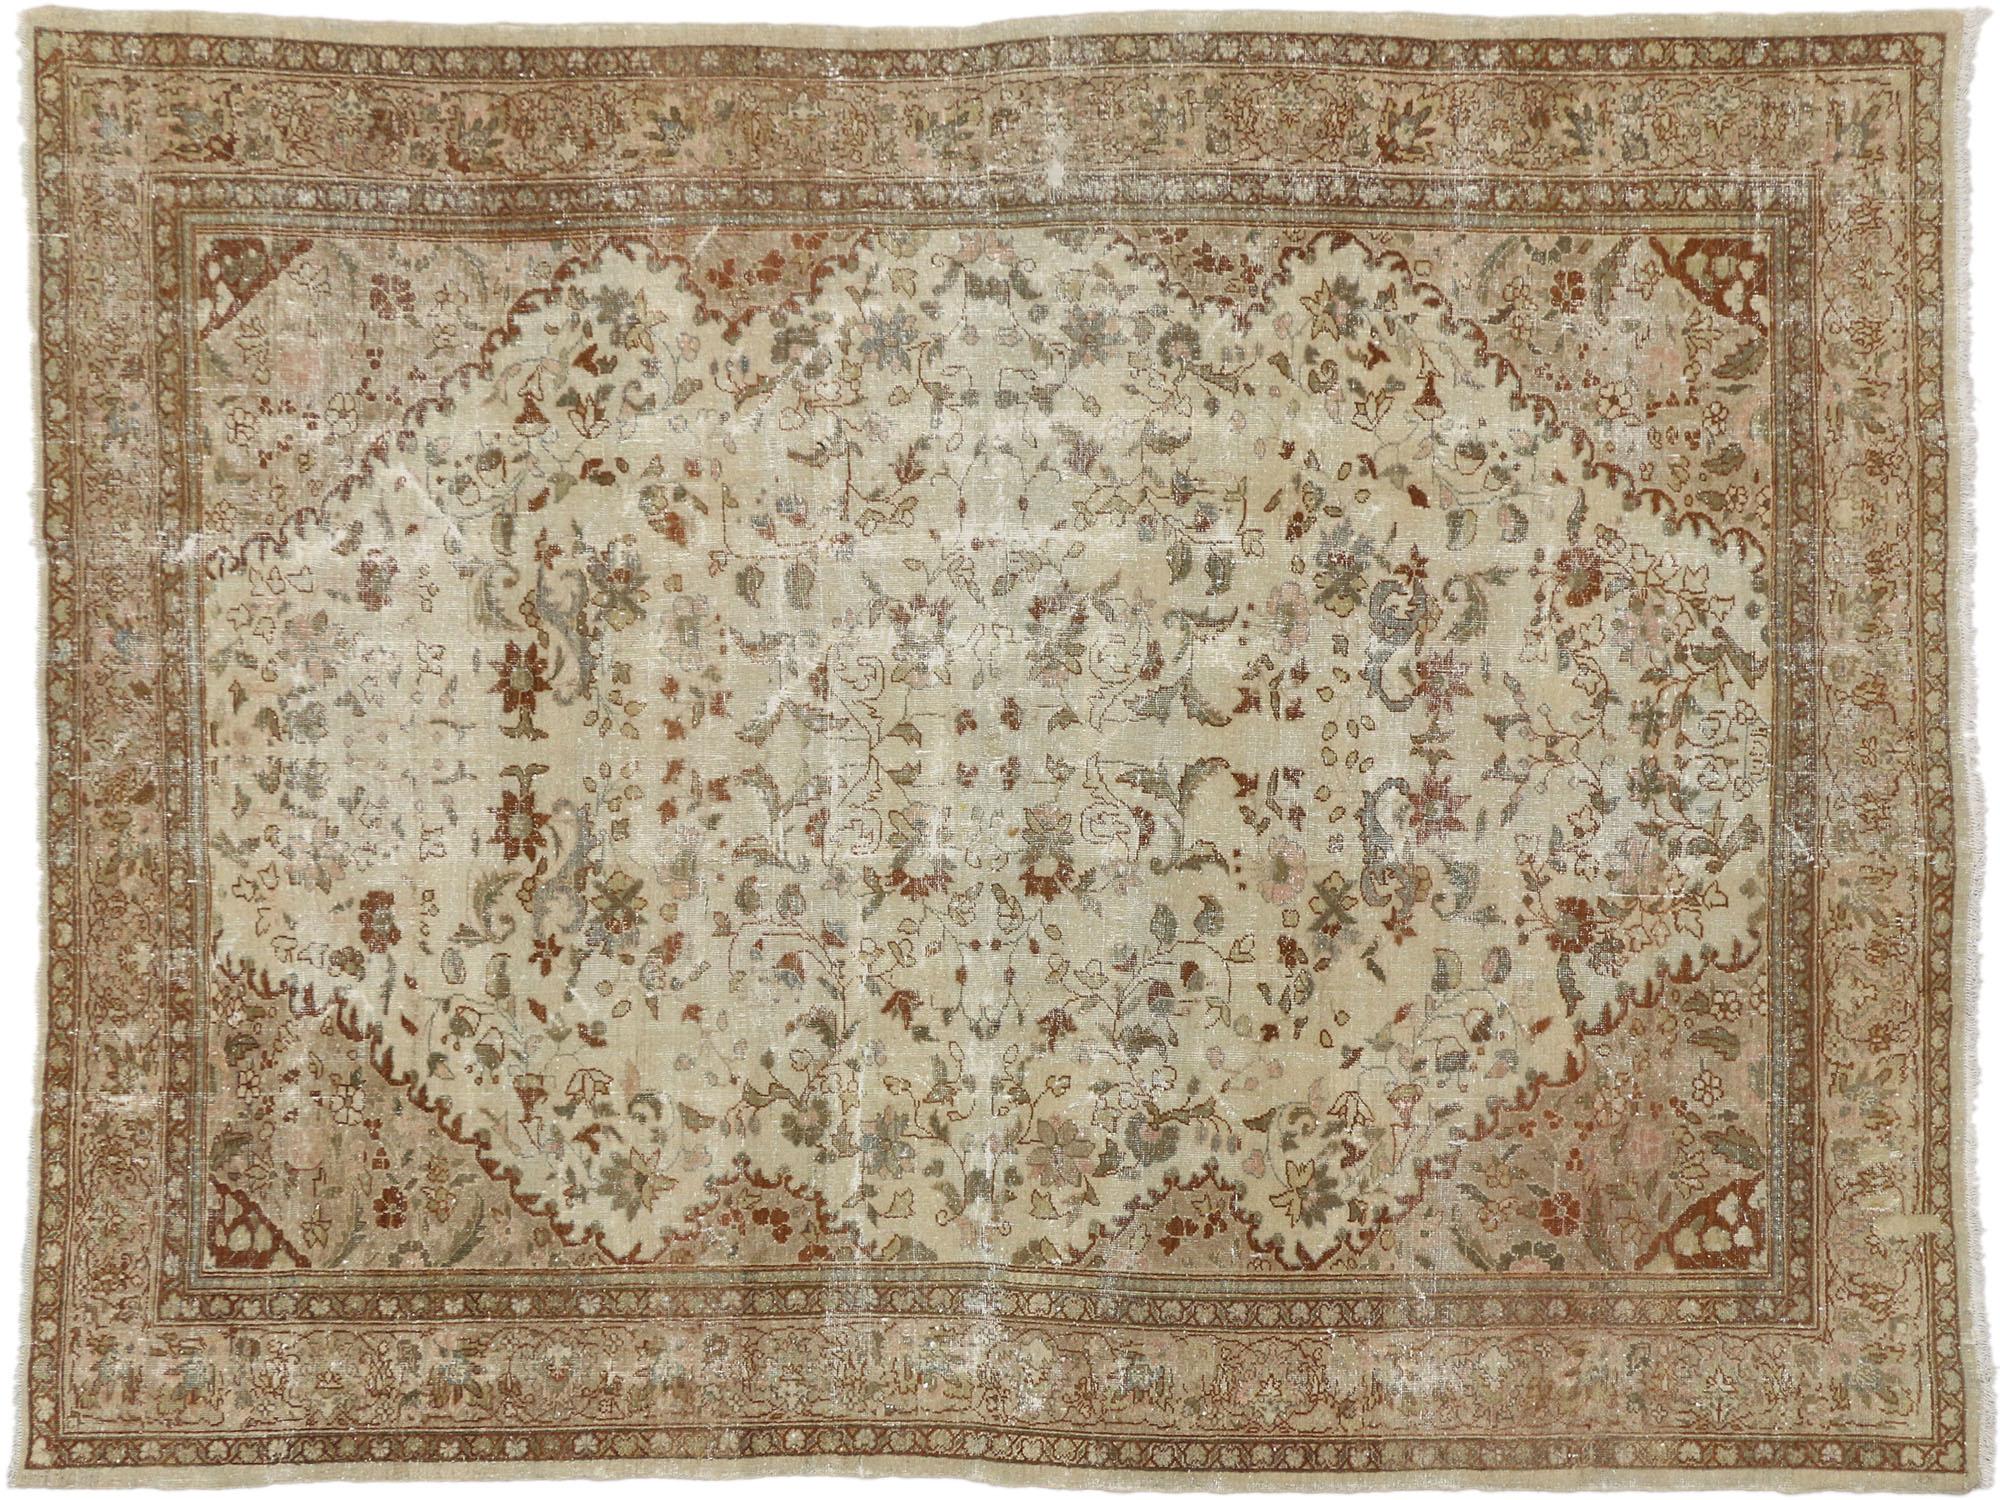 Rustic Distressed Antique Persian Mahal Rug with Shabby Chic Farmhouse Style For Sale